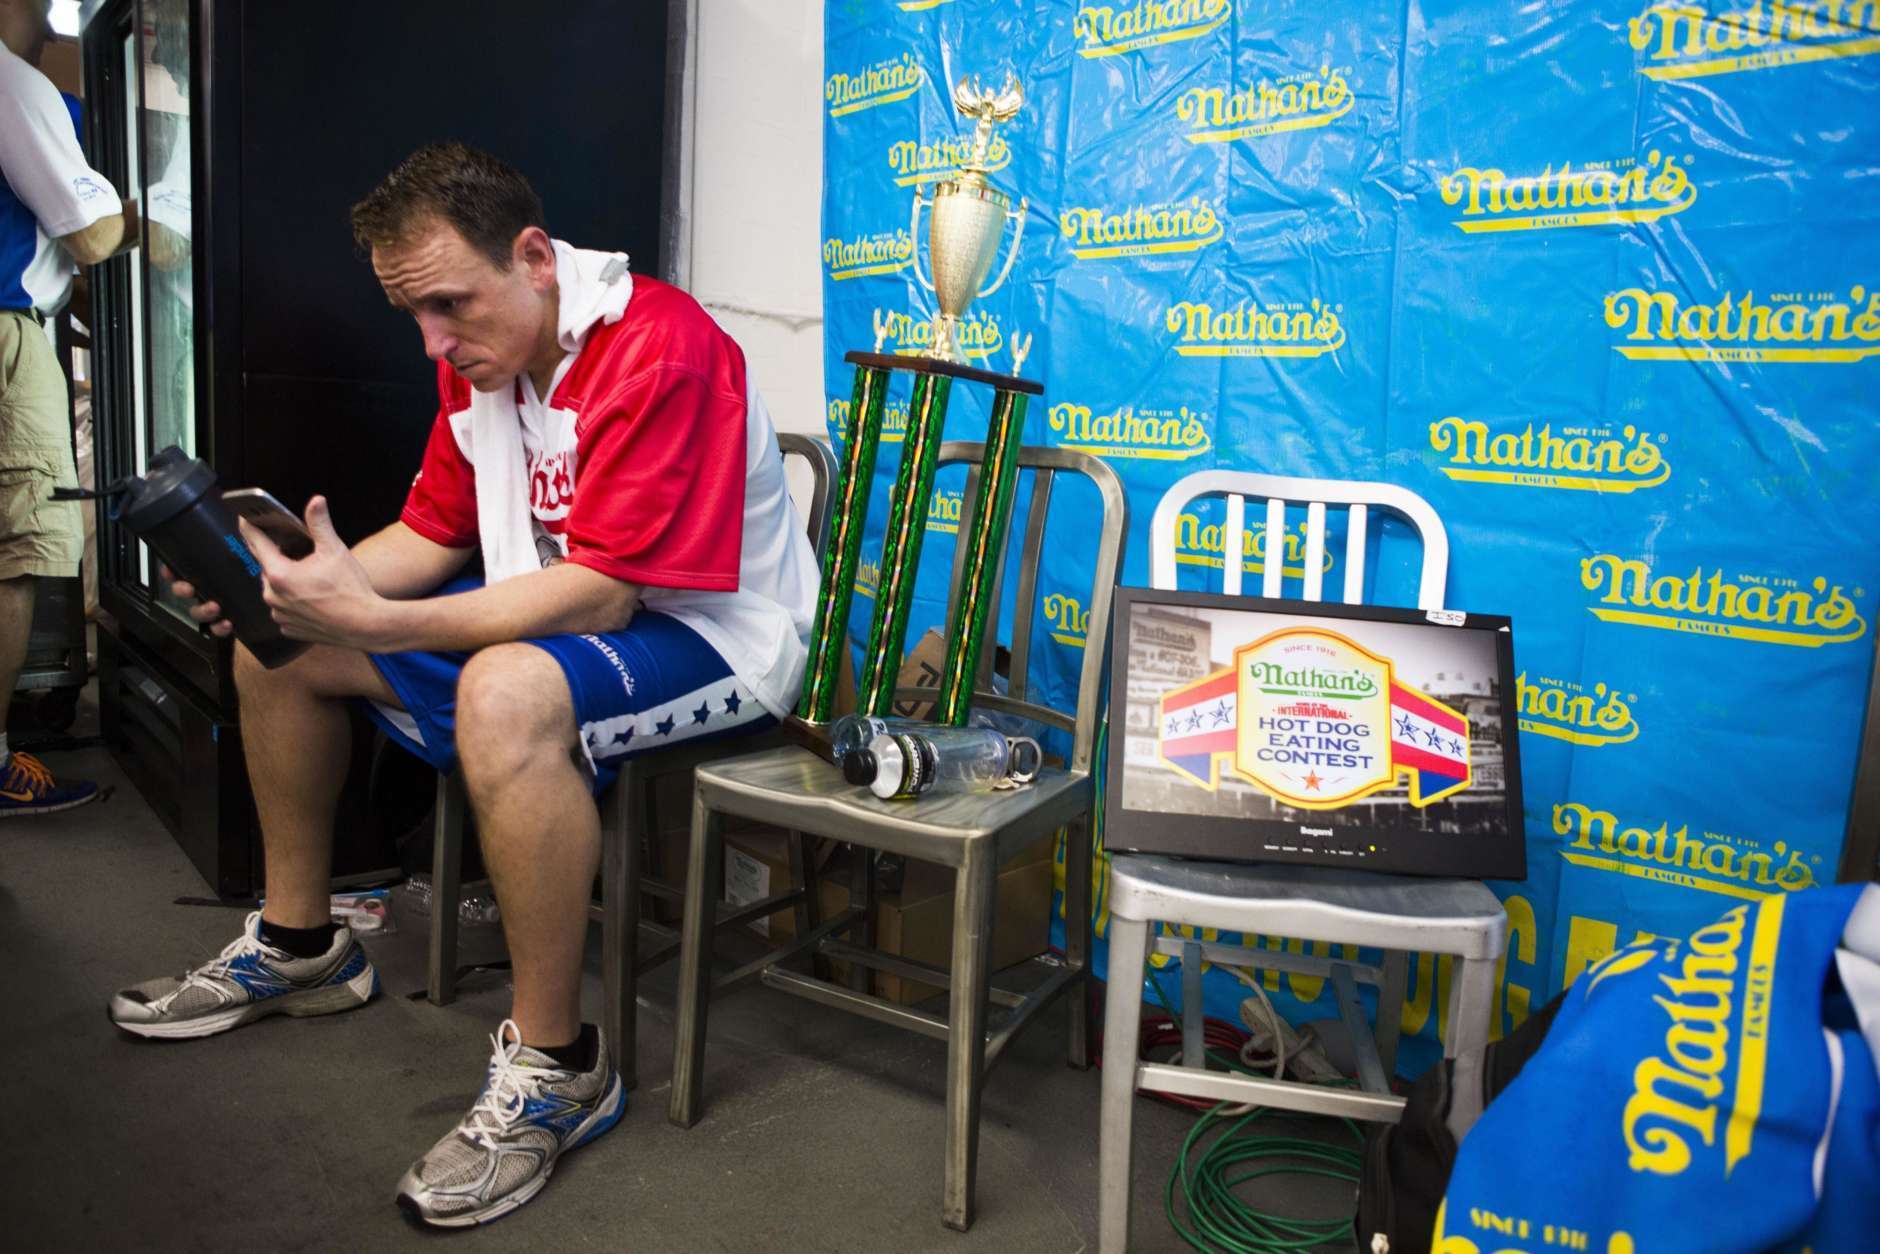 Joey Chestnut gets in the zone before the Nathan's Famous Hotdog eating contest Tuesday, July 4, 2017, in Brooklyn, New York. Chestnut ate 72 hotdogs in 10 minutes to claim his 10th win. (AP Photo/Michael Noble Jr.)